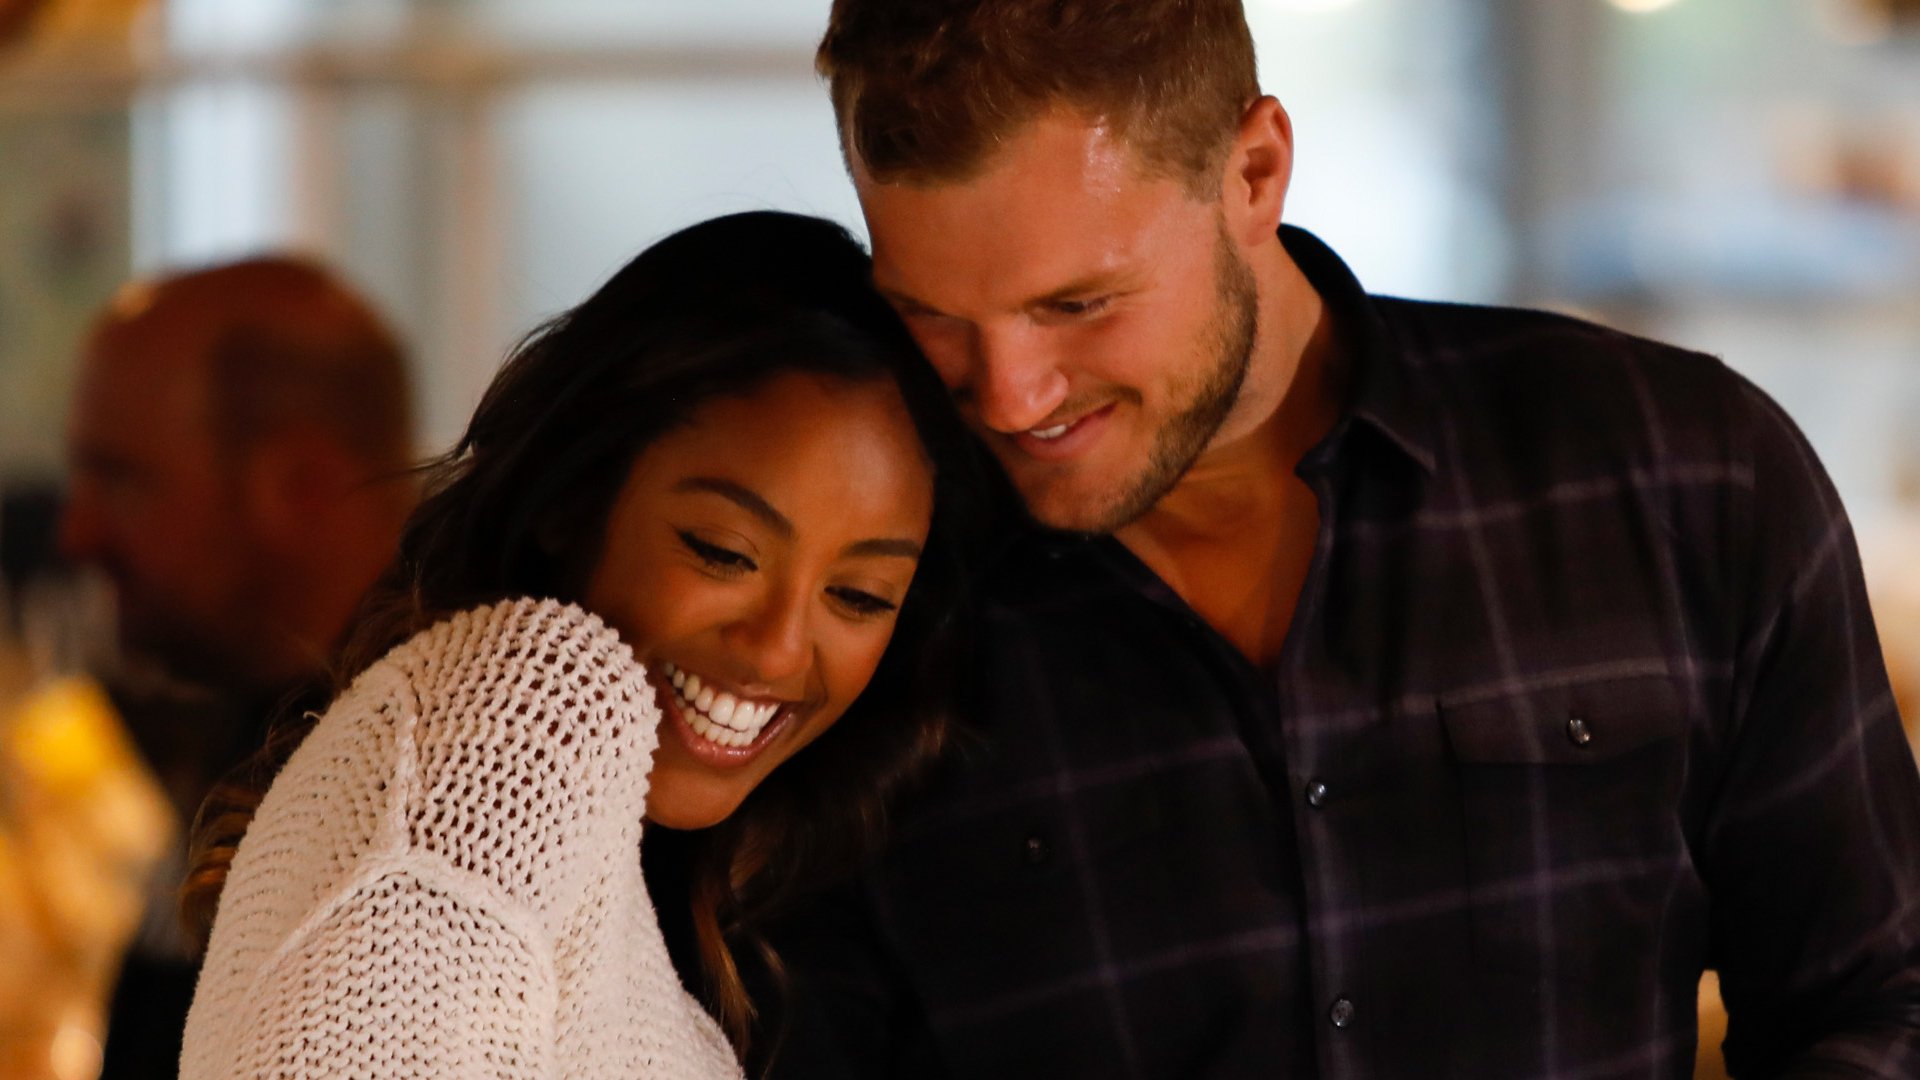 Tayshia Adams and Colton Underwood on a date during 'The Bachelor' Season 23